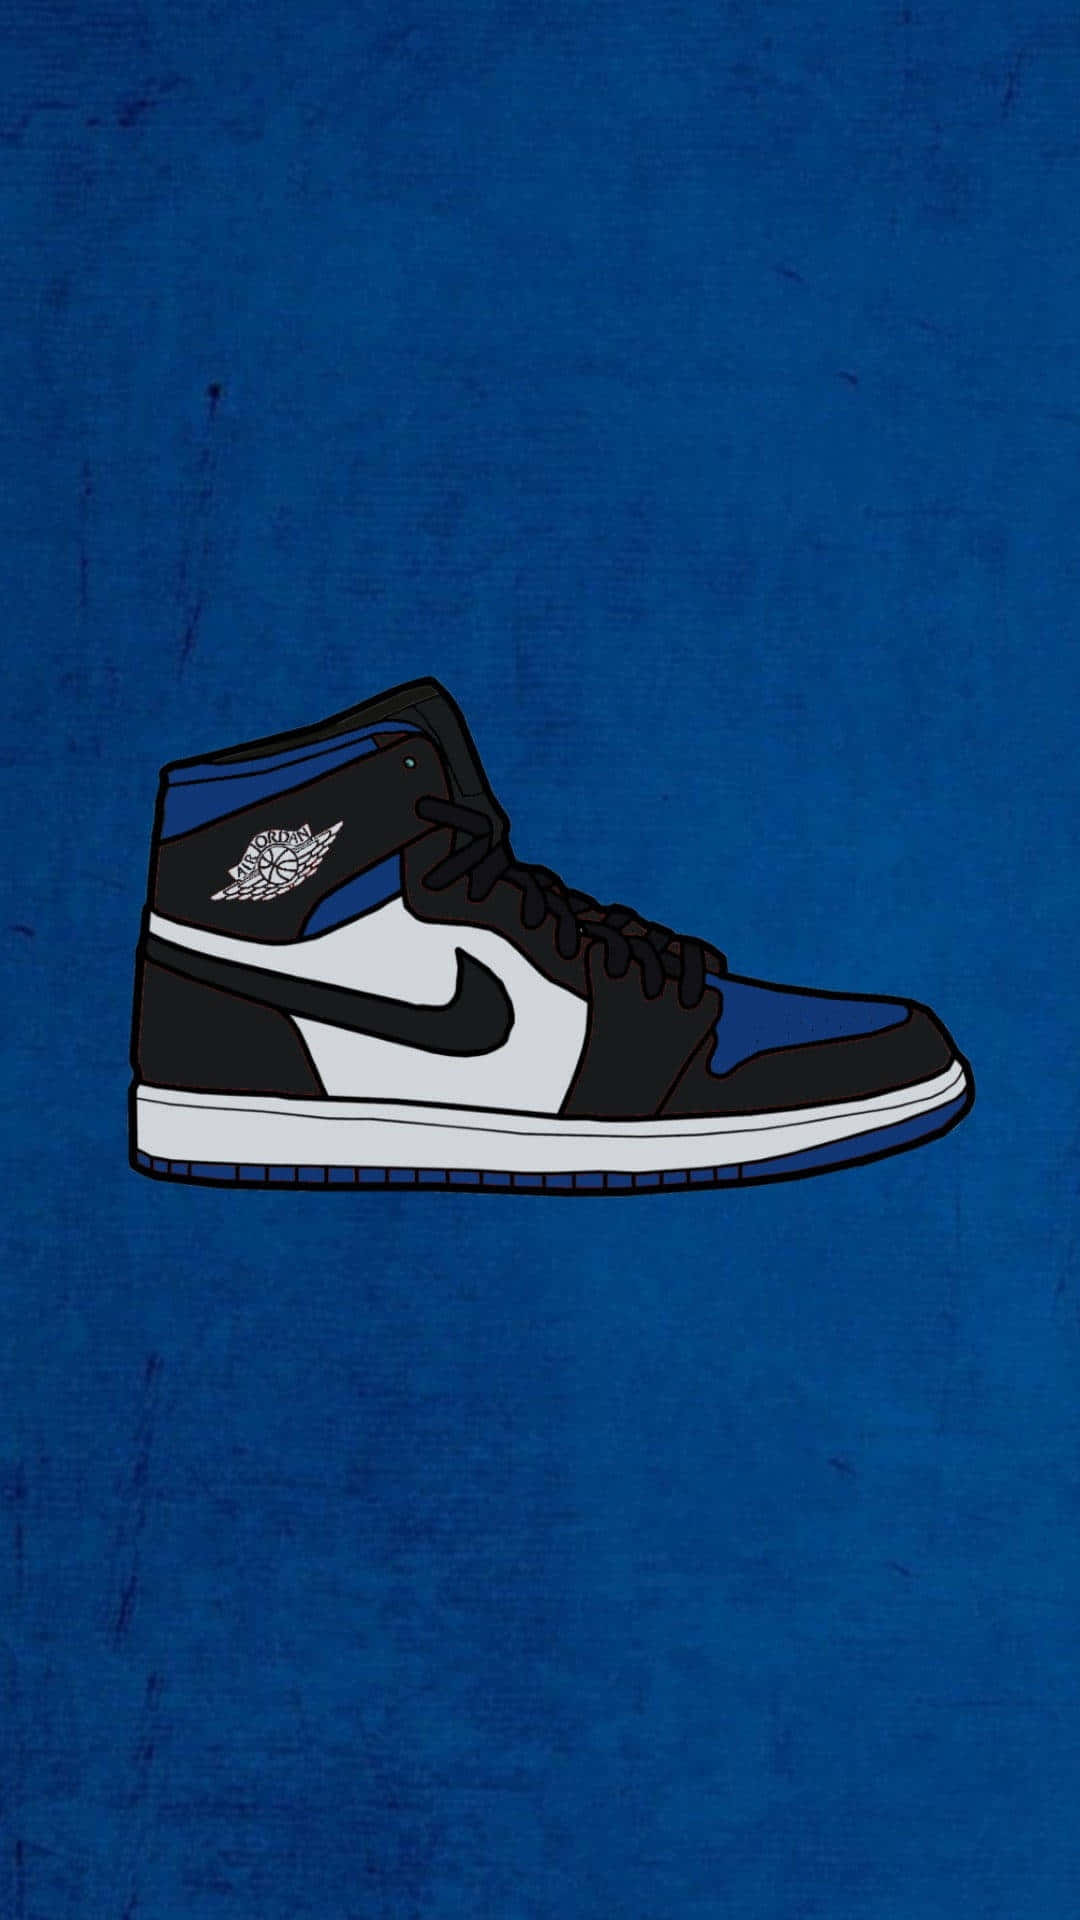 Iconic High Top Sneaker Illustration Wallpaper